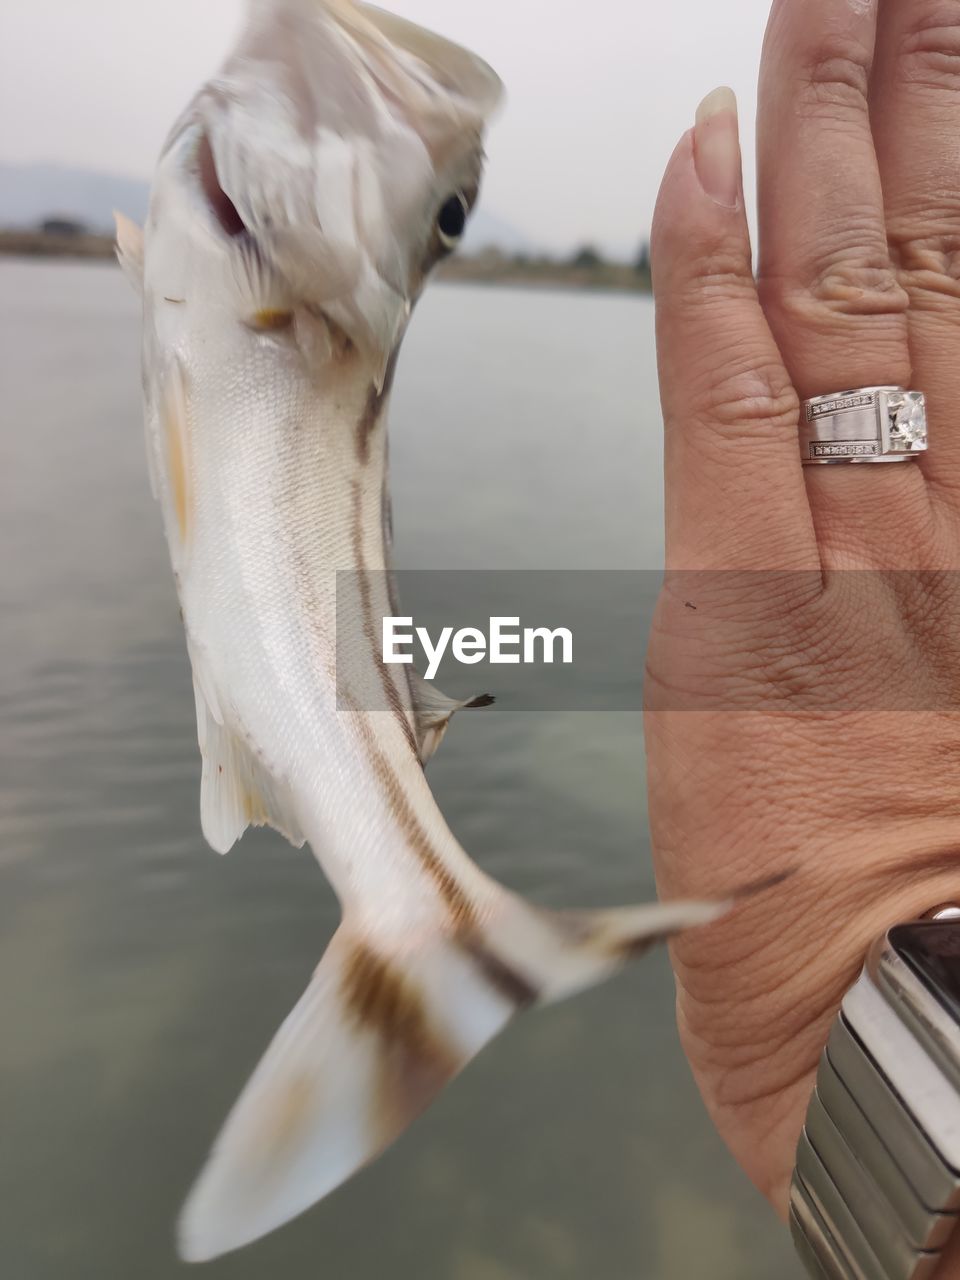 CROPPED IMAGE OF HAND FEEDING SEAGULL